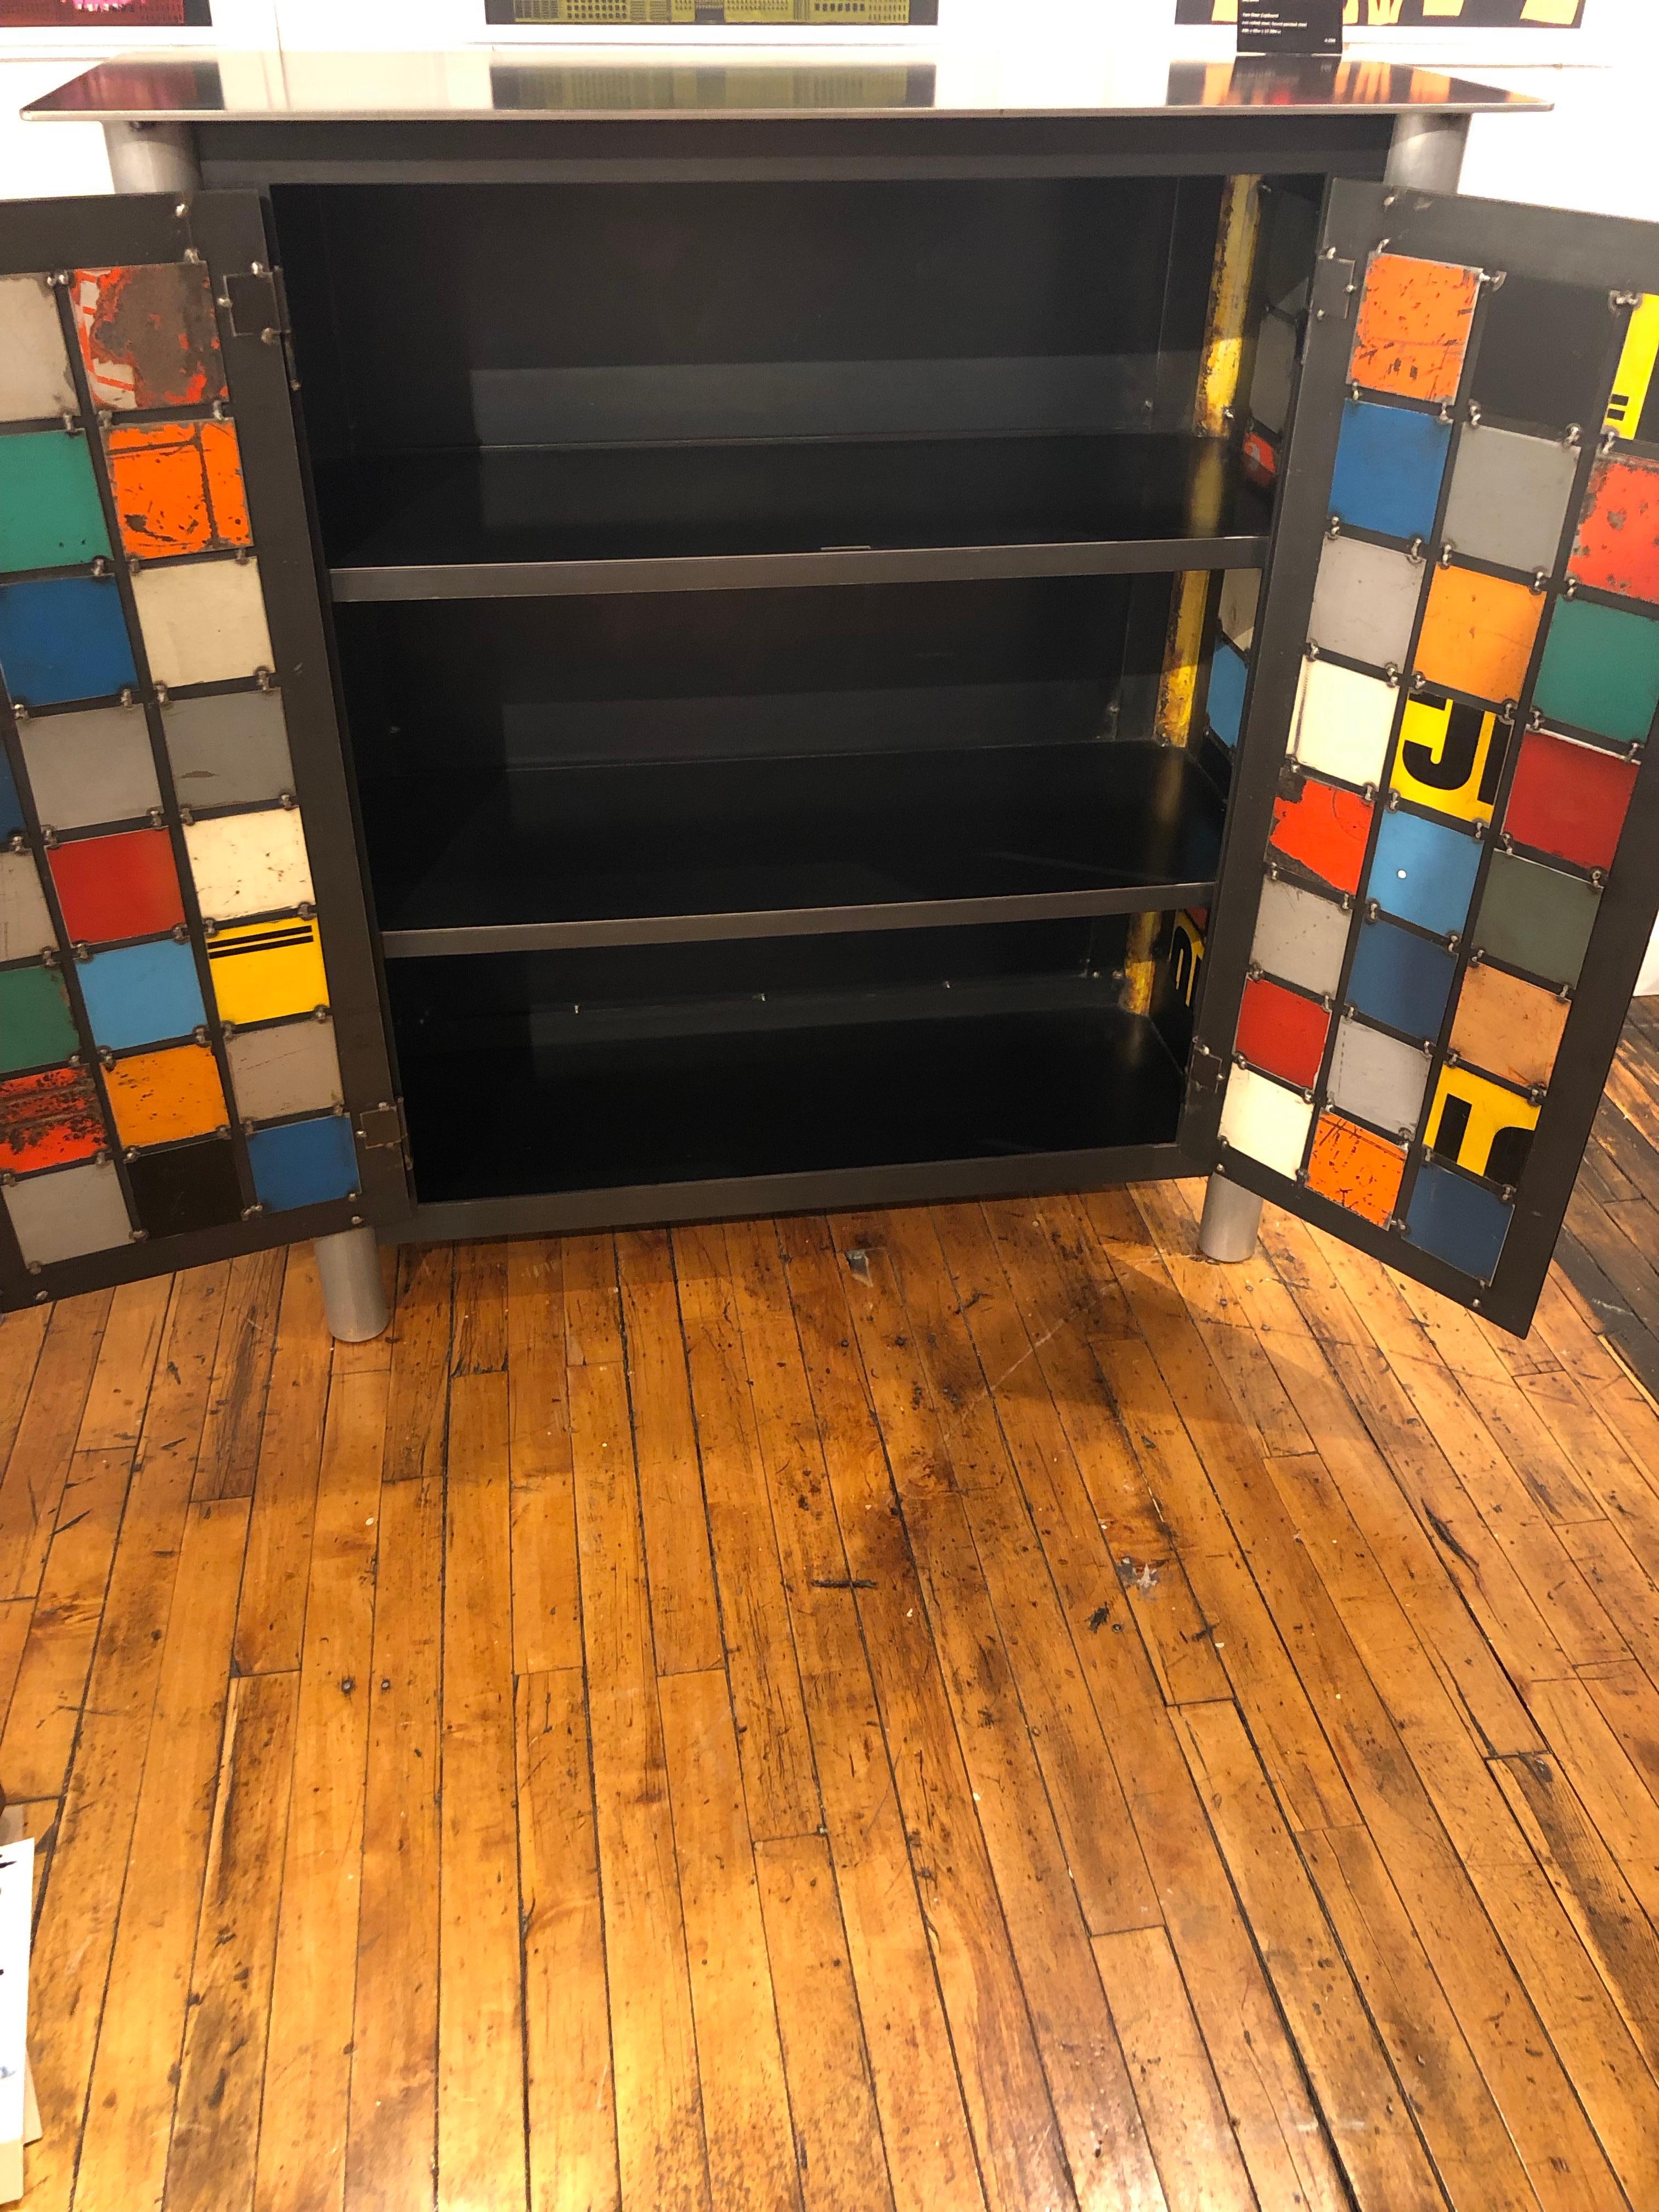 Two Door Mulit-color Quilt Cupboard - Steel Furniture, Gee's Bend Quilt Design - Contemporary Art by Jim Rose